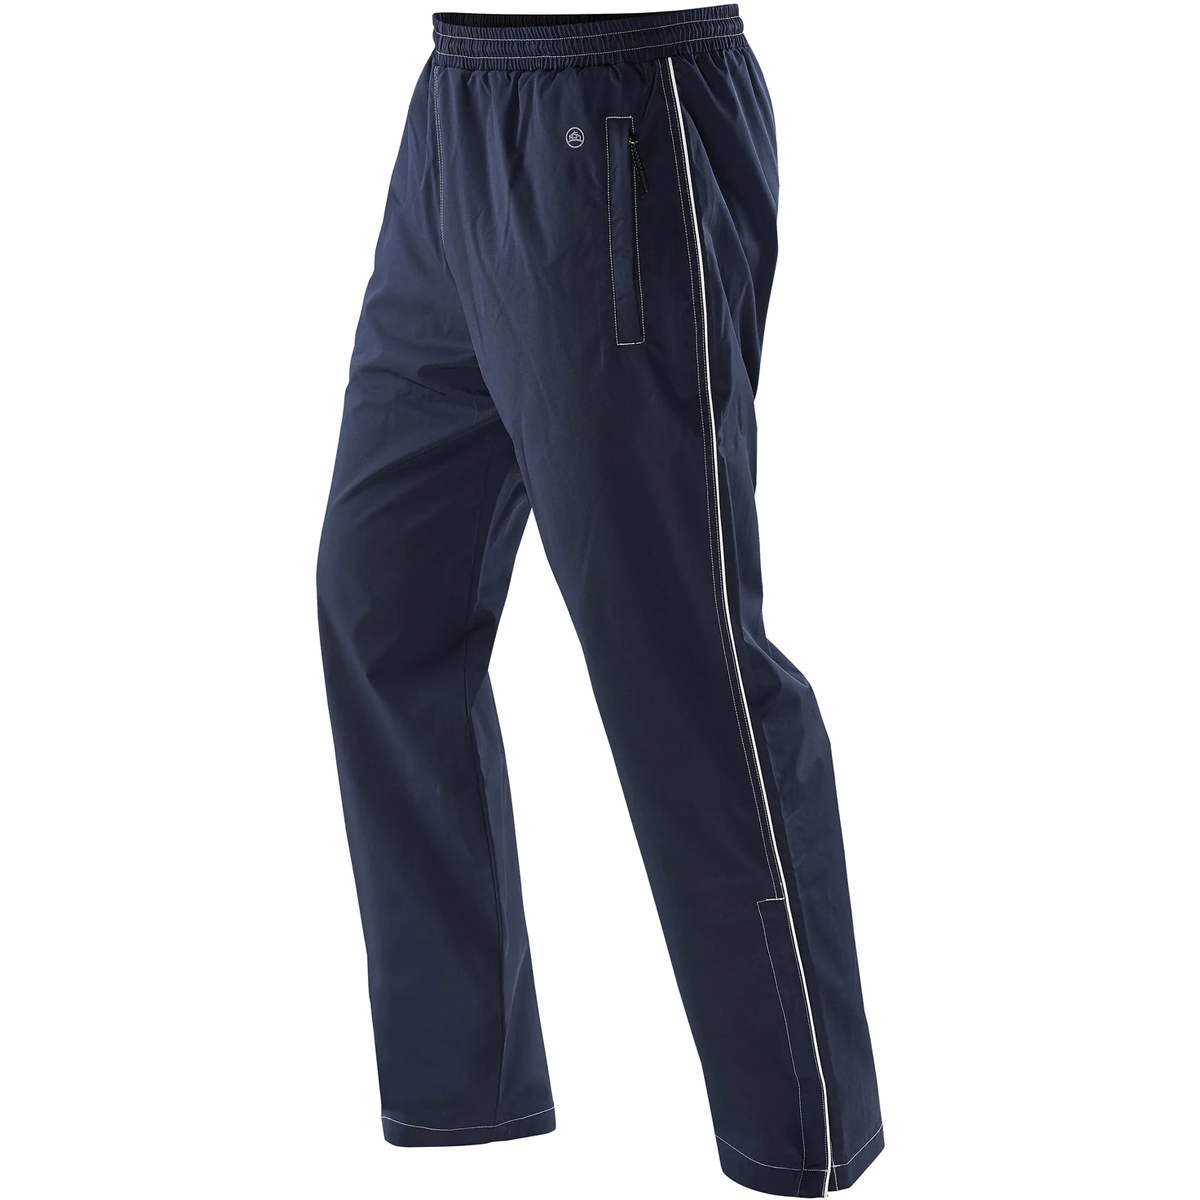 STORMTECH YOUTH WARRIOR TRAINING PANT